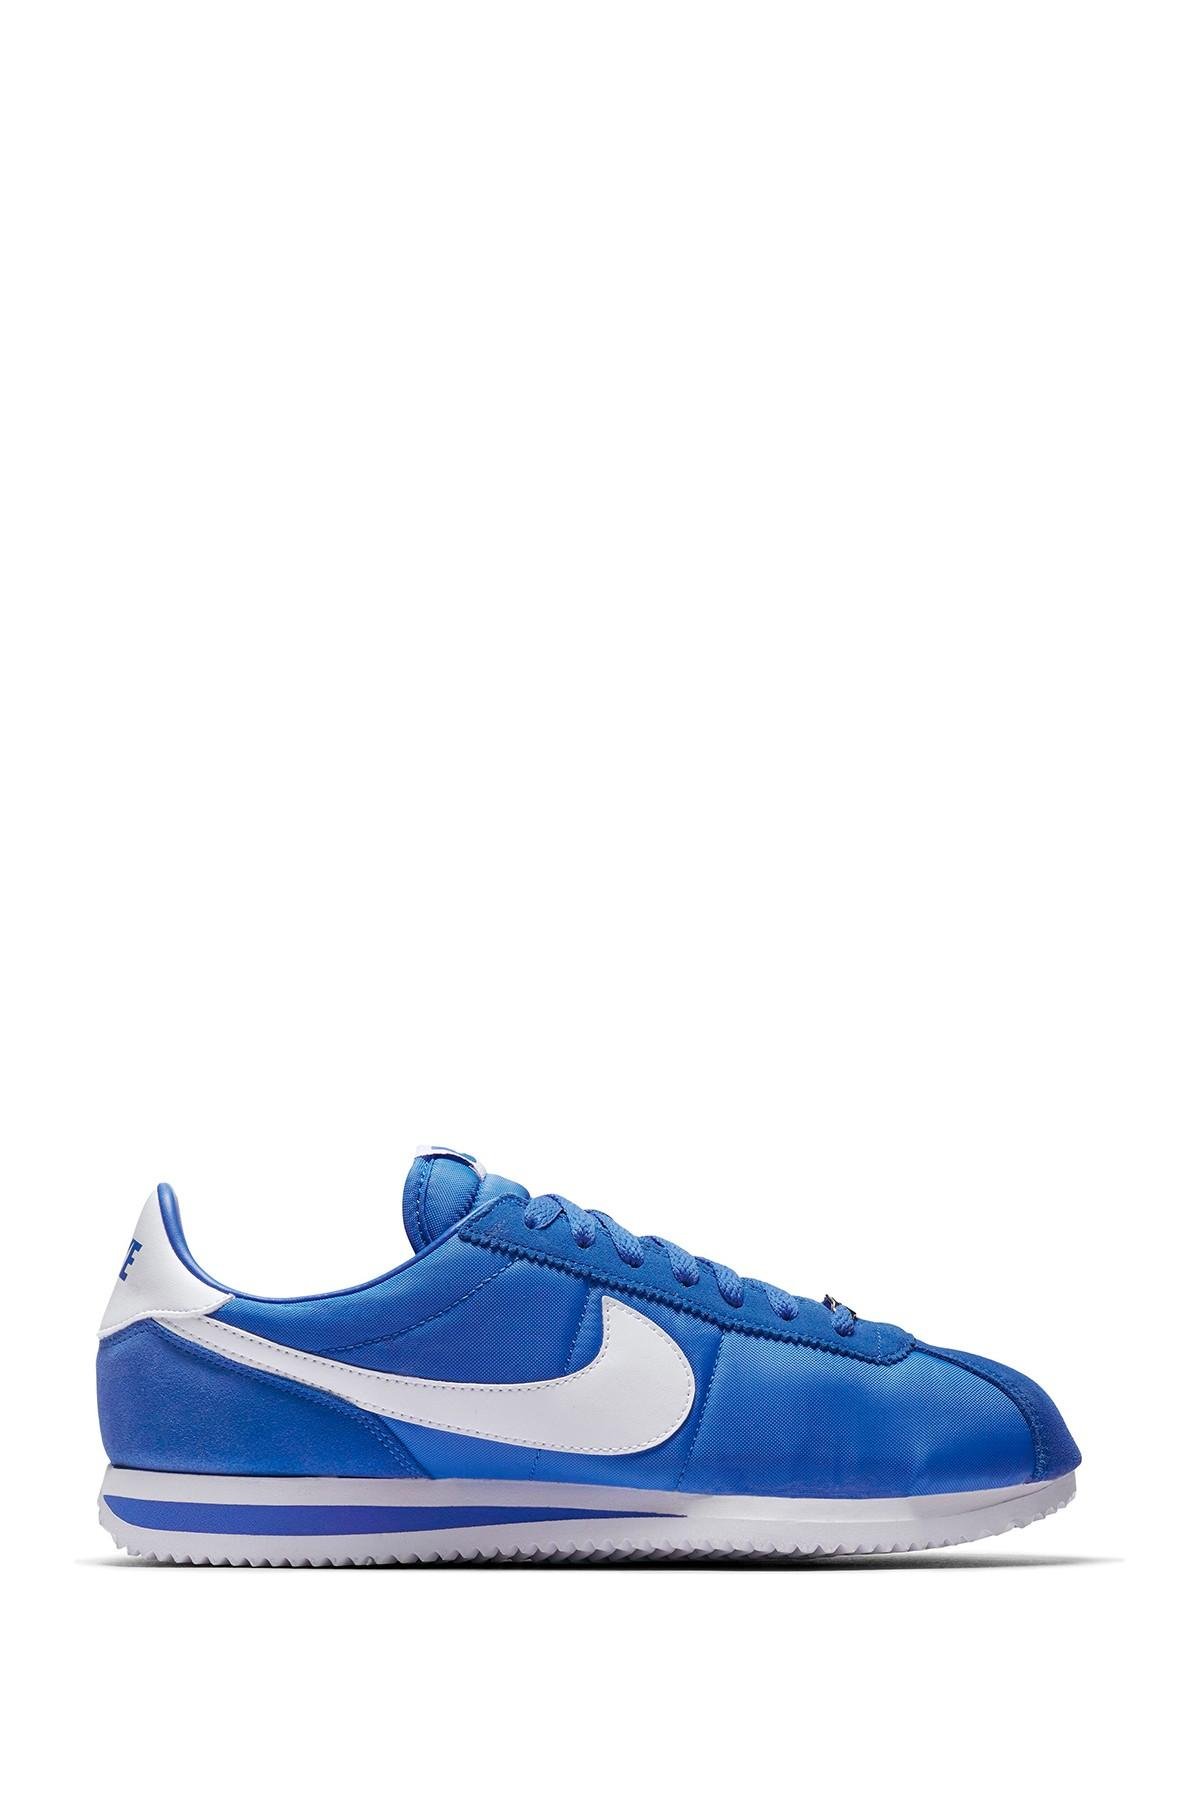 Nike Synthetic Cortez Nylon (signal Blue/white) Classic Shoes for